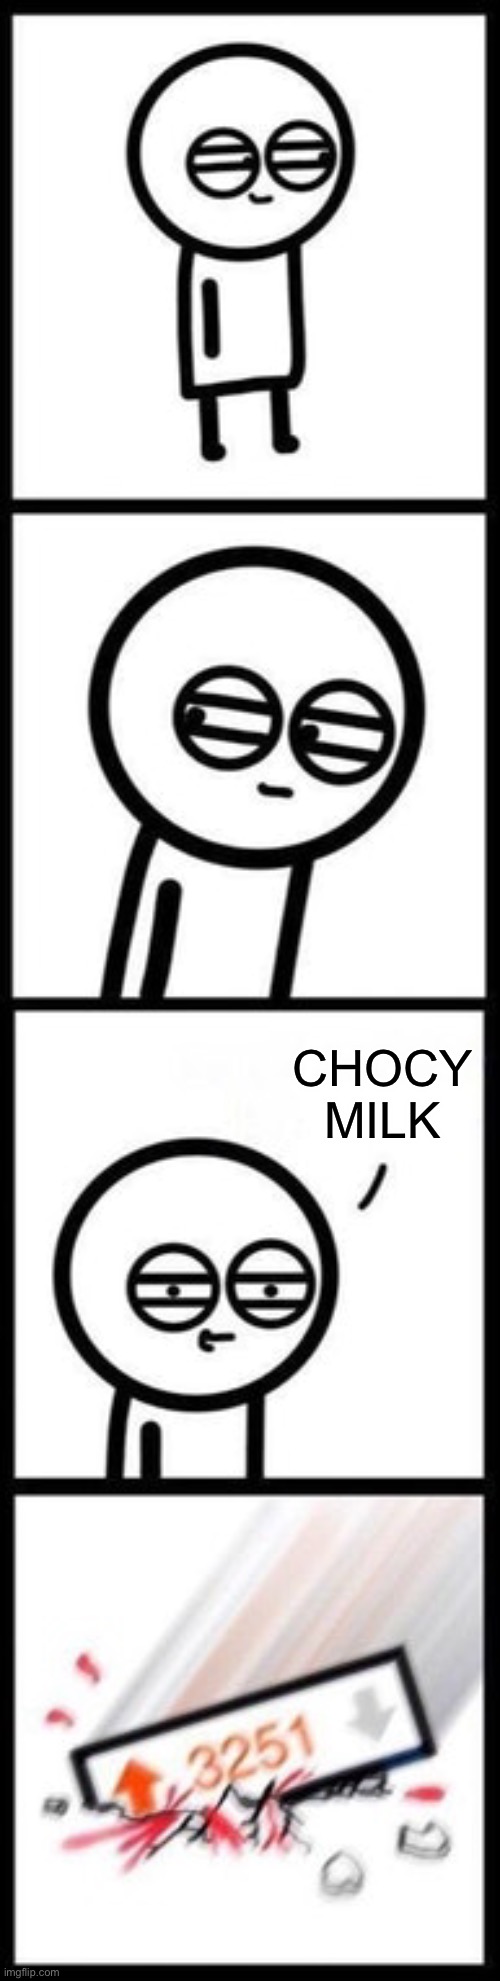 100% True | CHOCY MILK | image tagged in 3251 upvotes | made w/ Imgflip meme maker